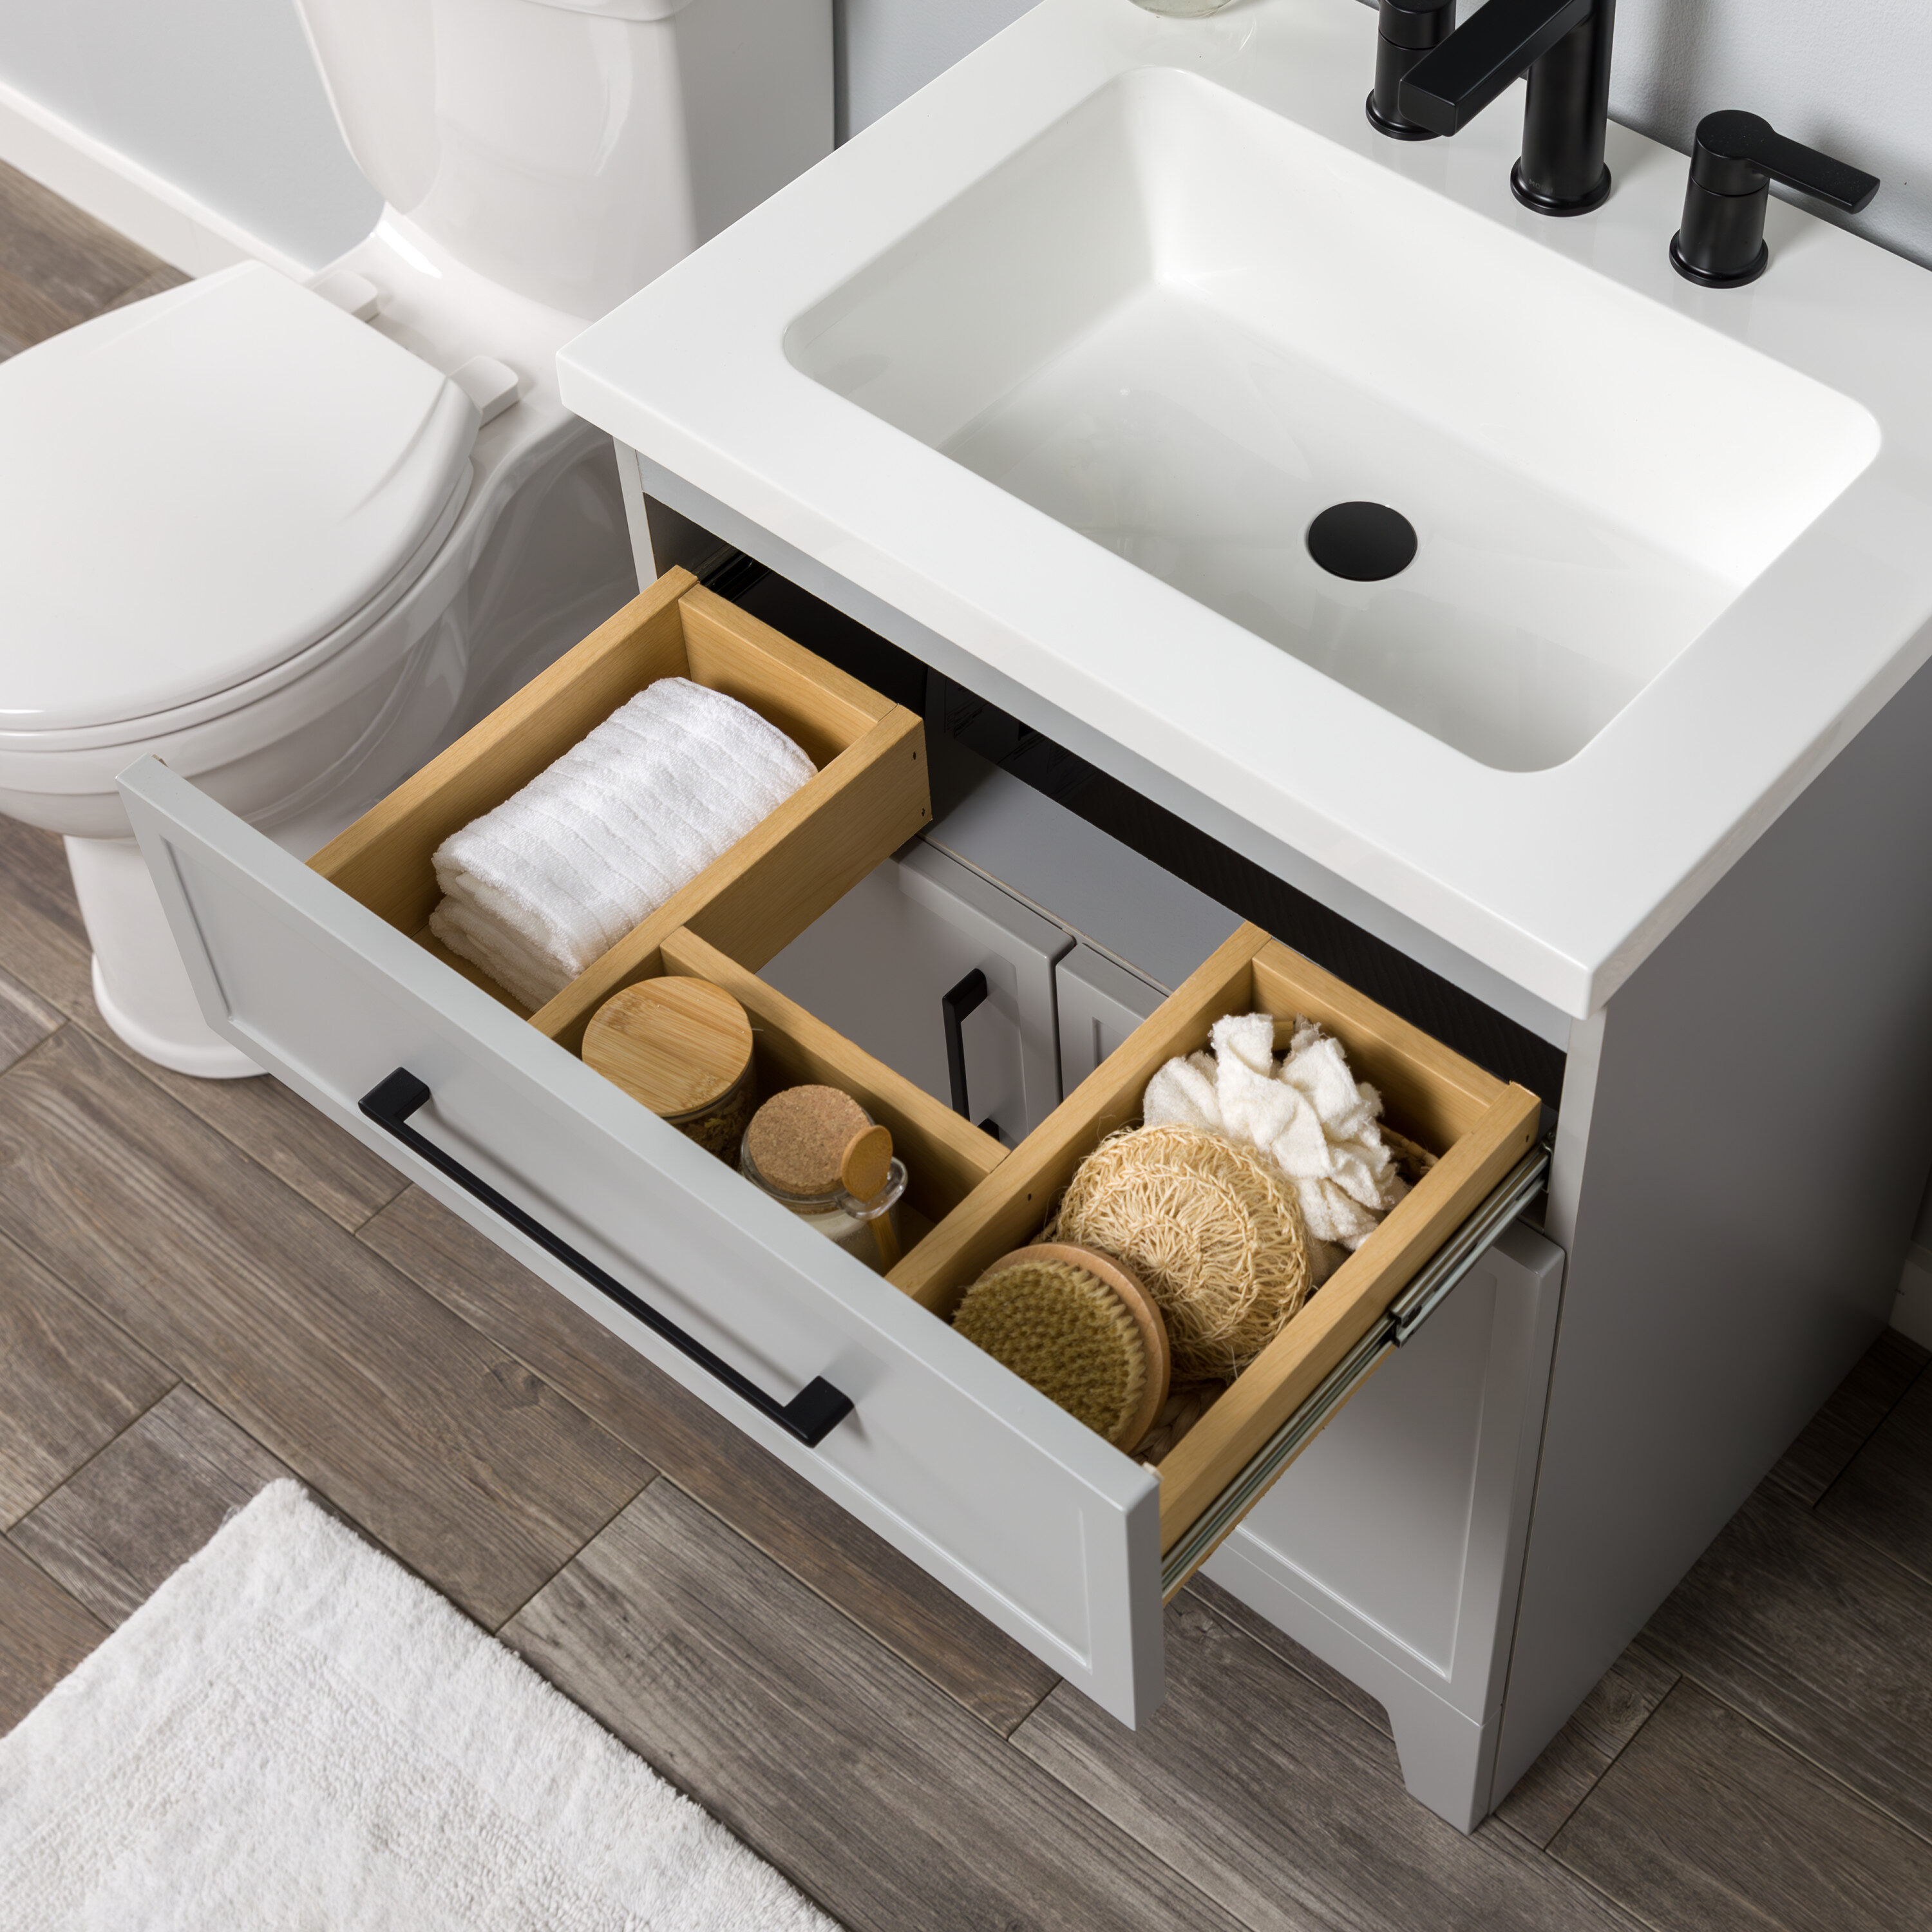 Style Selections Dolton 24-in Natural Oak Undermount Single Sink Bathroom Vanity with White Engineered Stone Top (Mirror Included)